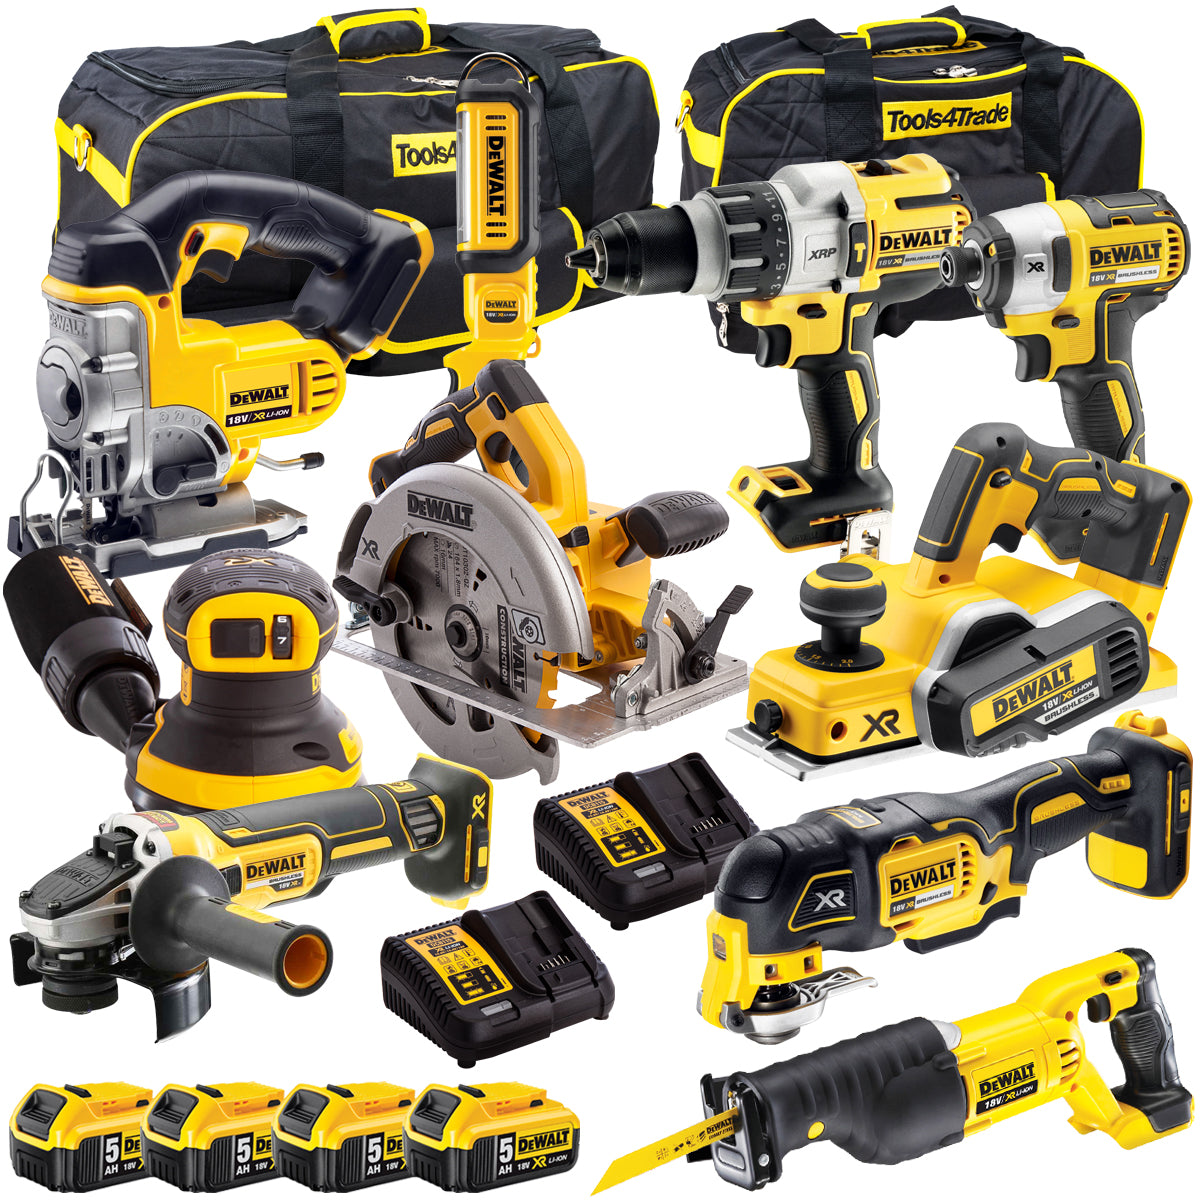 Dewalt 18V 10 Piece Power Tool Kit with 4 x 5.0Ah Battery + 2 x Charger & 2 x Tool Bag T4TKIT-12844